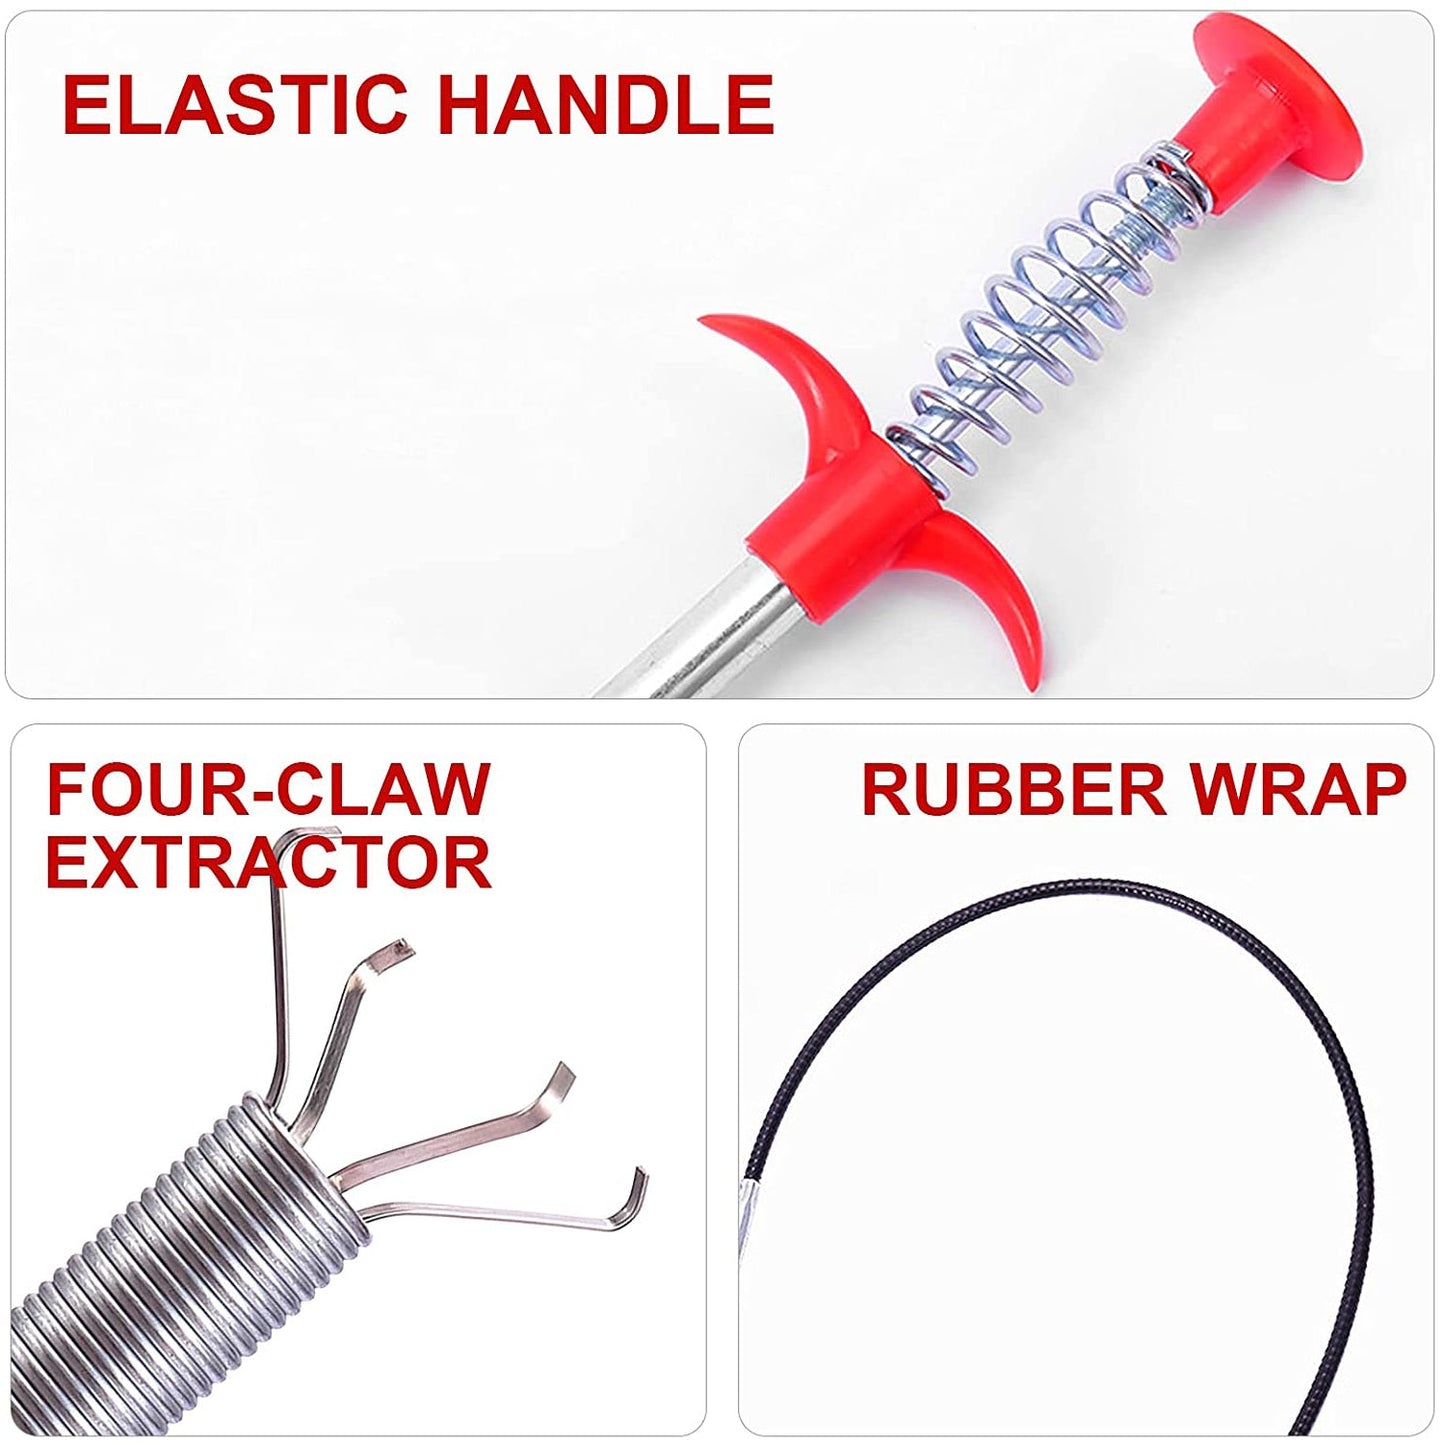 1622 Multifunctional Cleaning Claw Pilpe Cleaner Drainage Block Remover Drain Spring Pipe Dredging Tool, Drain Cleaning Tool for Hair Drain Drain Cleaner Sticks drain pipe clearer ( 90 Cm)